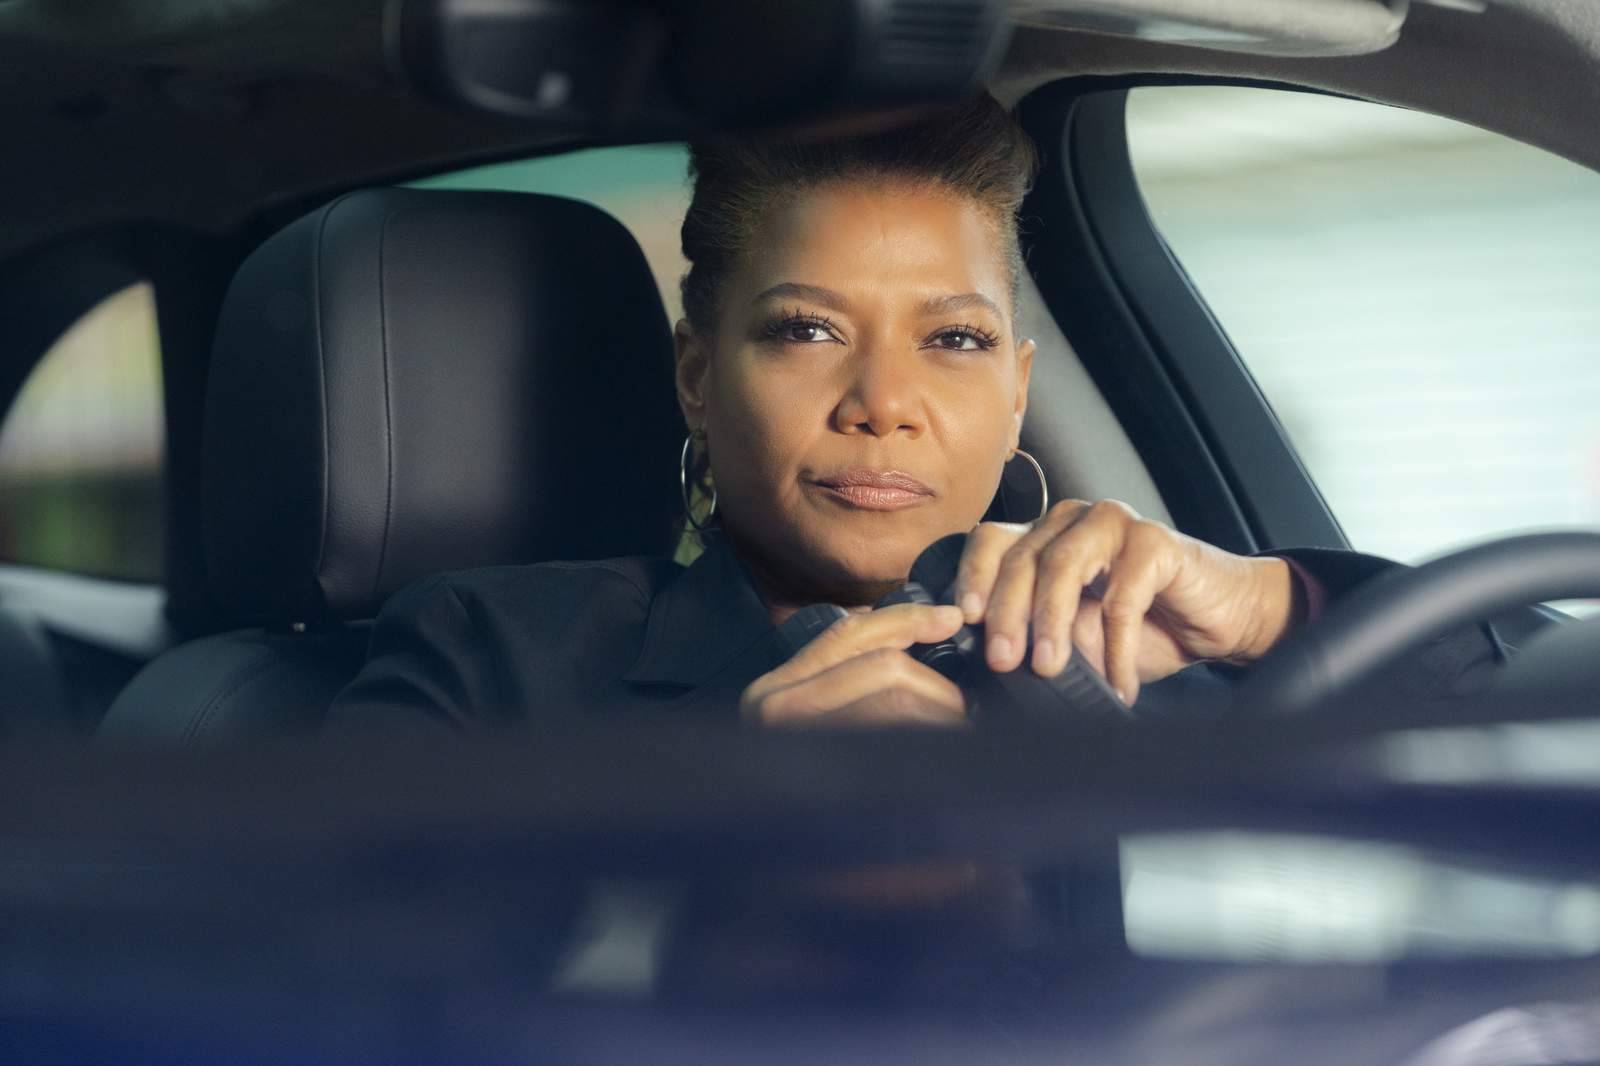 Queen Latifah 'stoked' to land post-Super Bowl slot for show